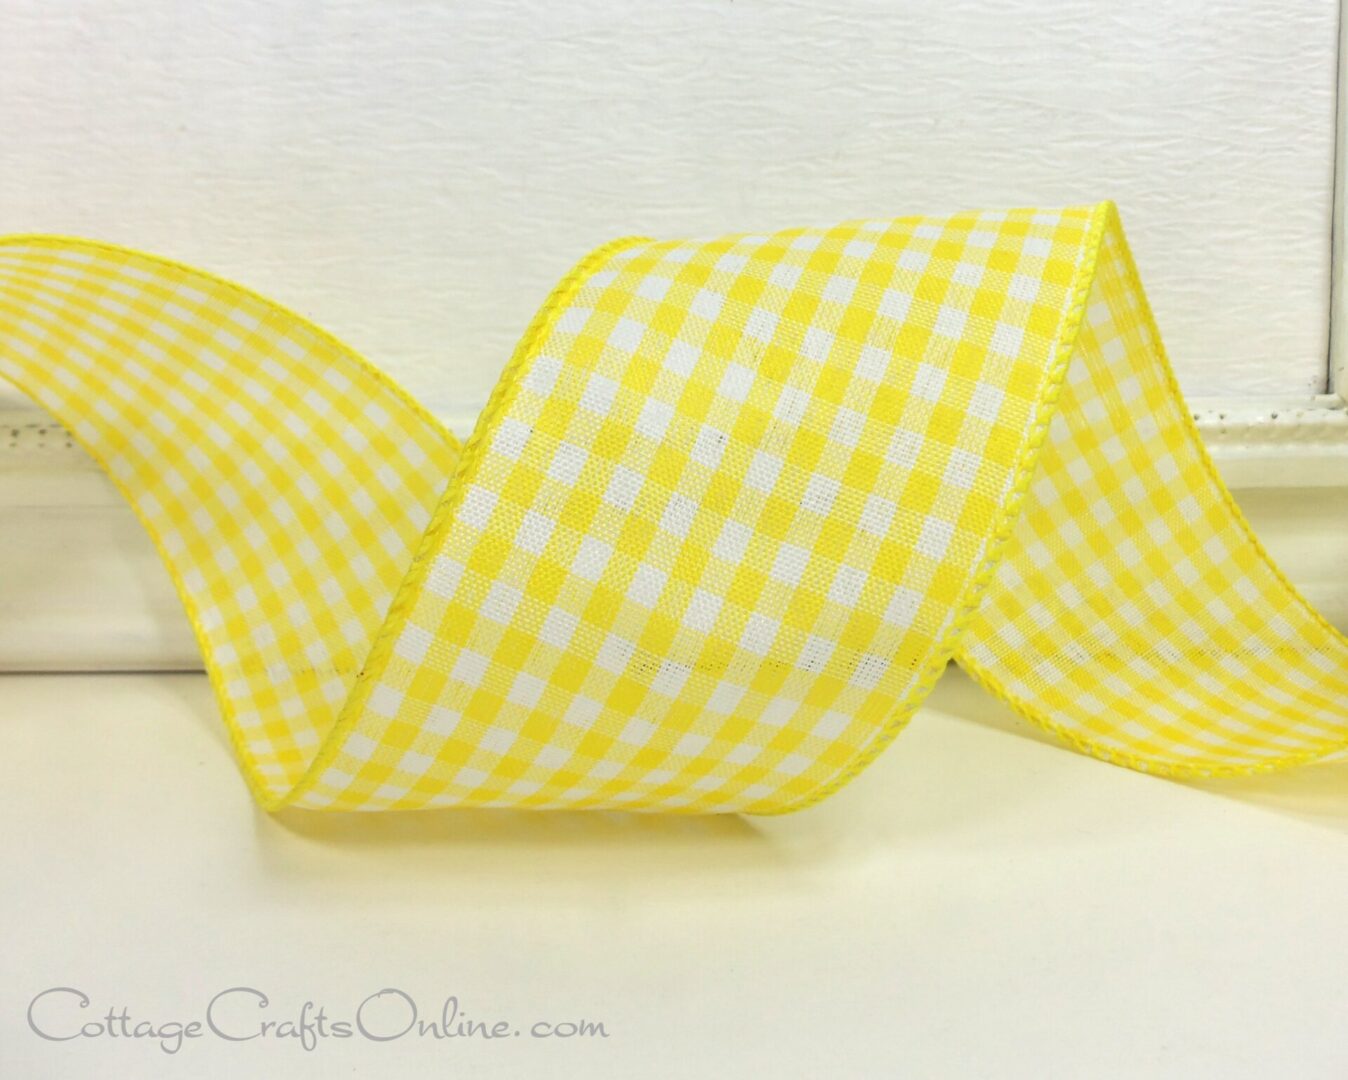 A yellow ribbon with white gingham on it.